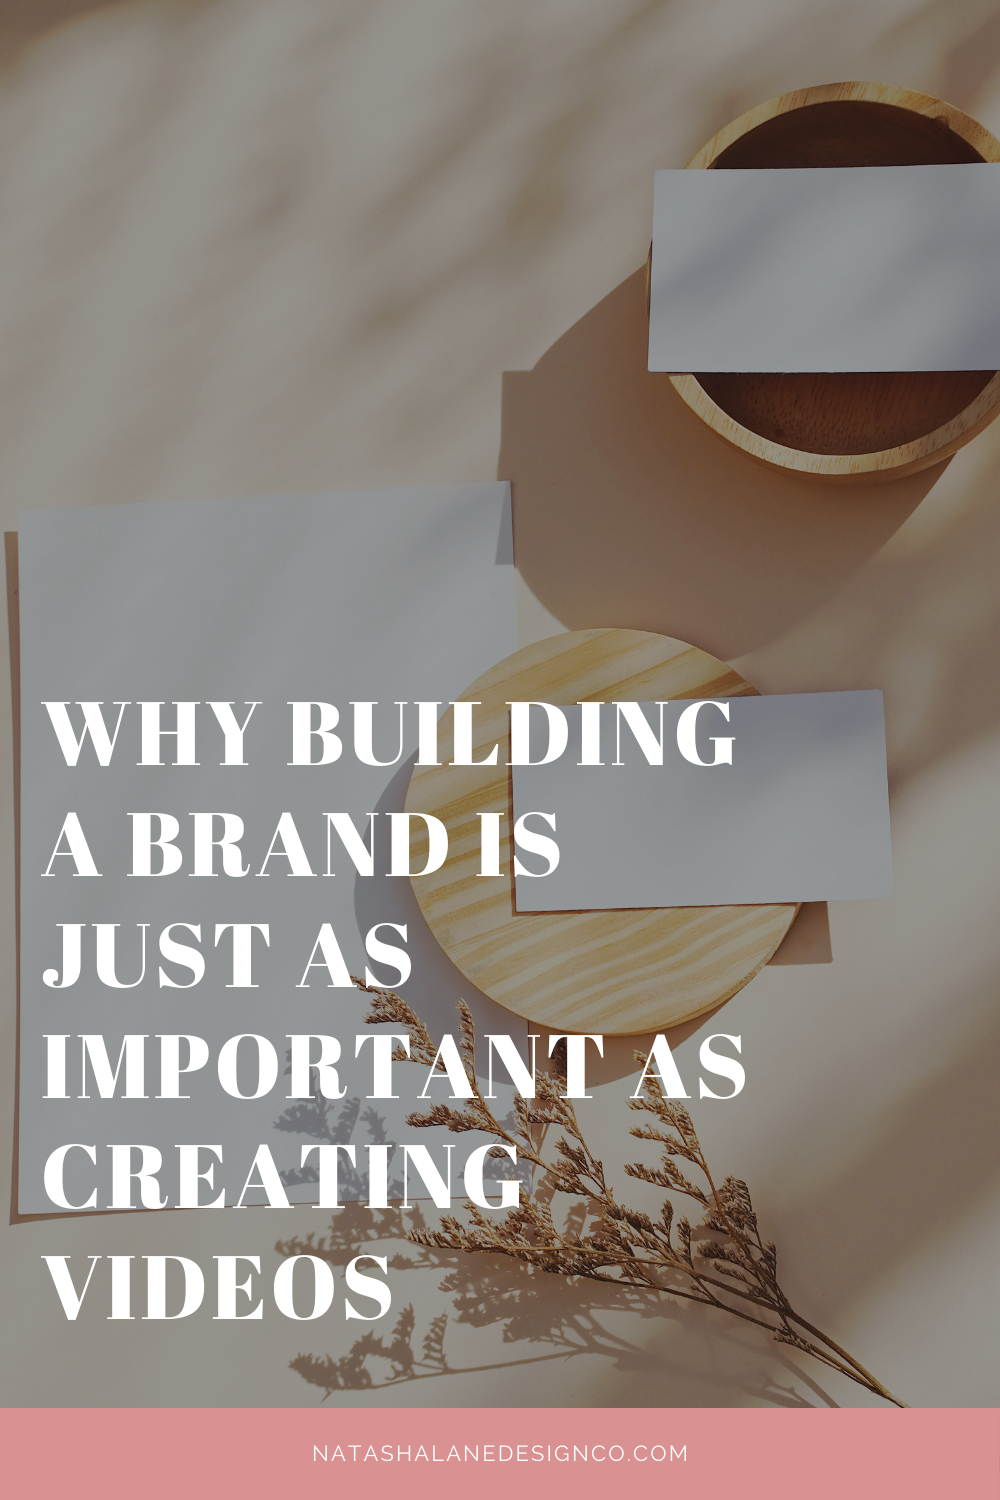 Why building a brand is just as important as creating videos